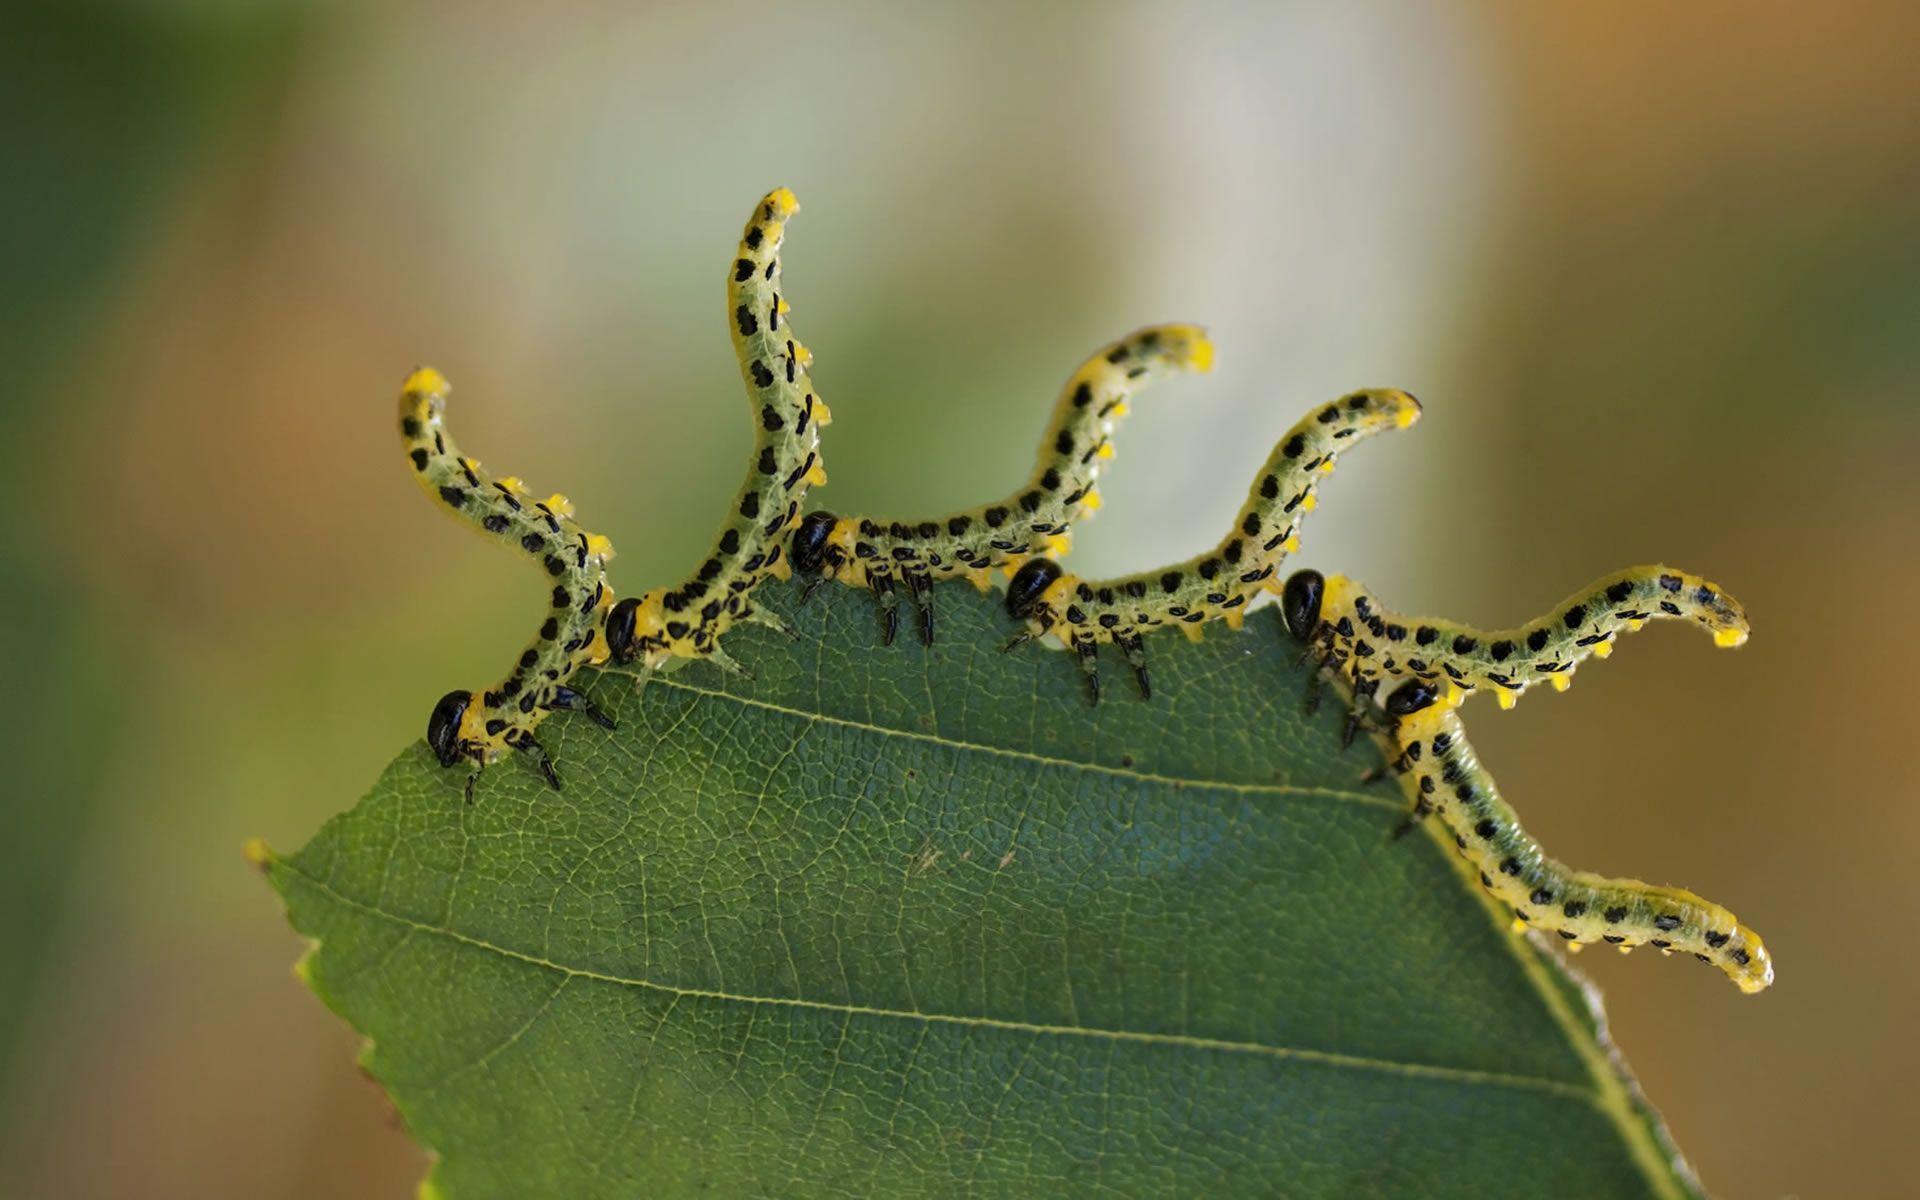 Download Wallpaper 1920x1200 Caterpillars, Leaf, Insects 1920x1200